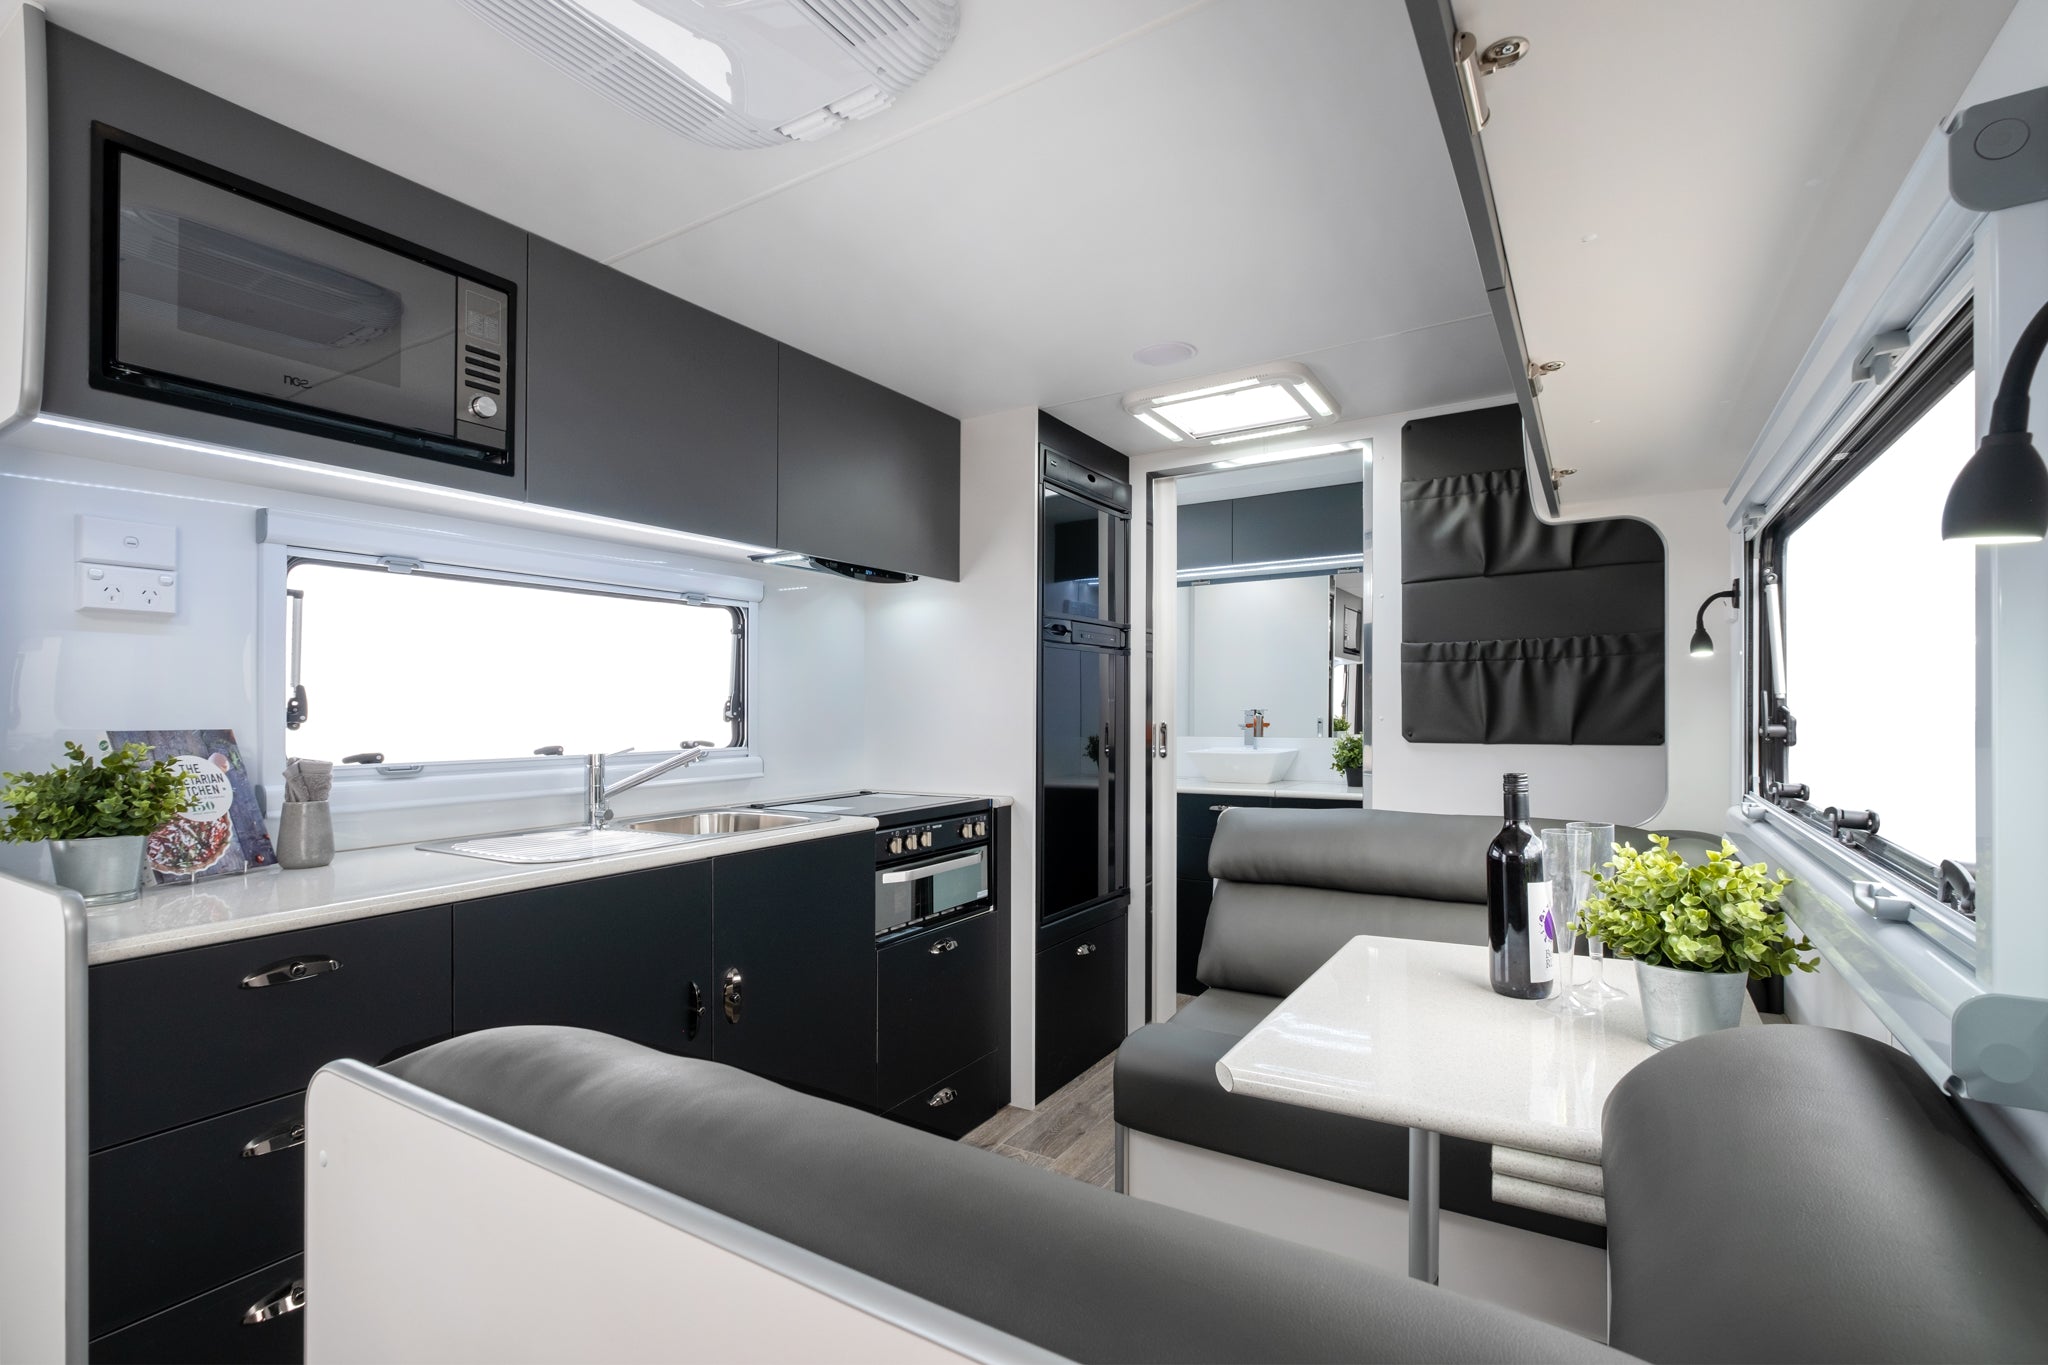 Coromal Thrill Seeker 19'6 Couples interior kitchen and seating area